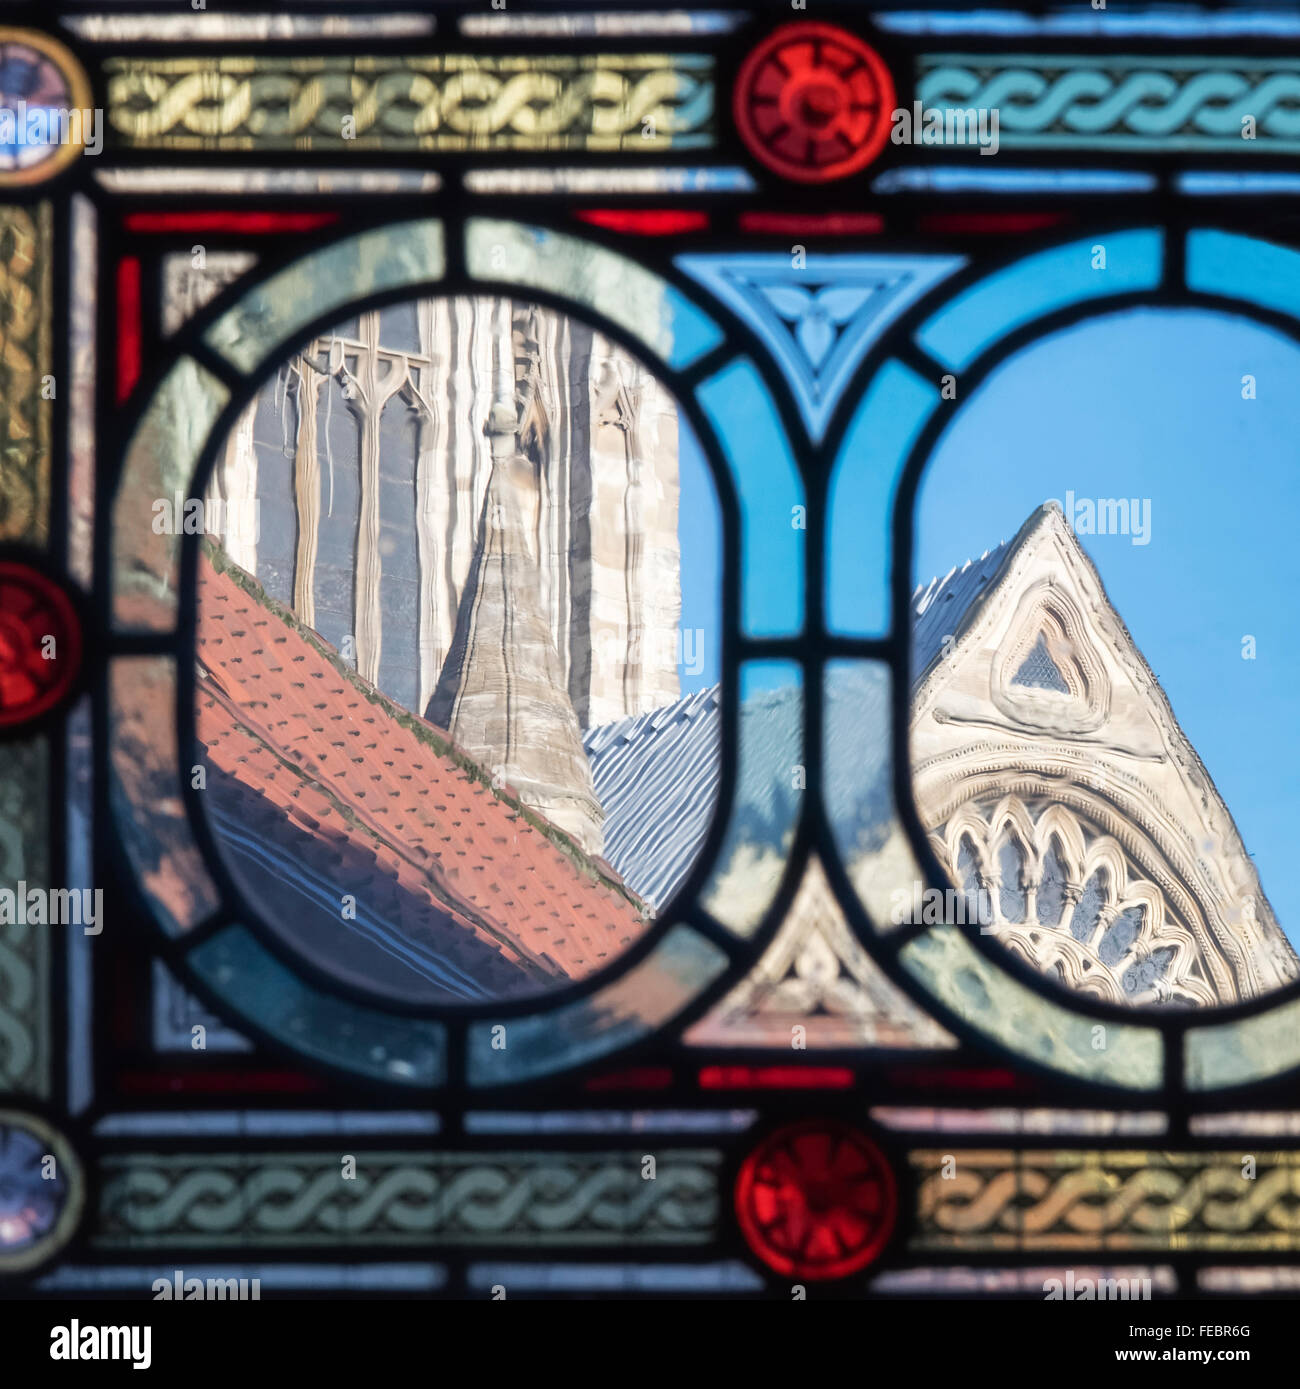 York MInster seen through a stained glass window in the former home of John Ward Knowles (artist), York, England, UK Stock Photo